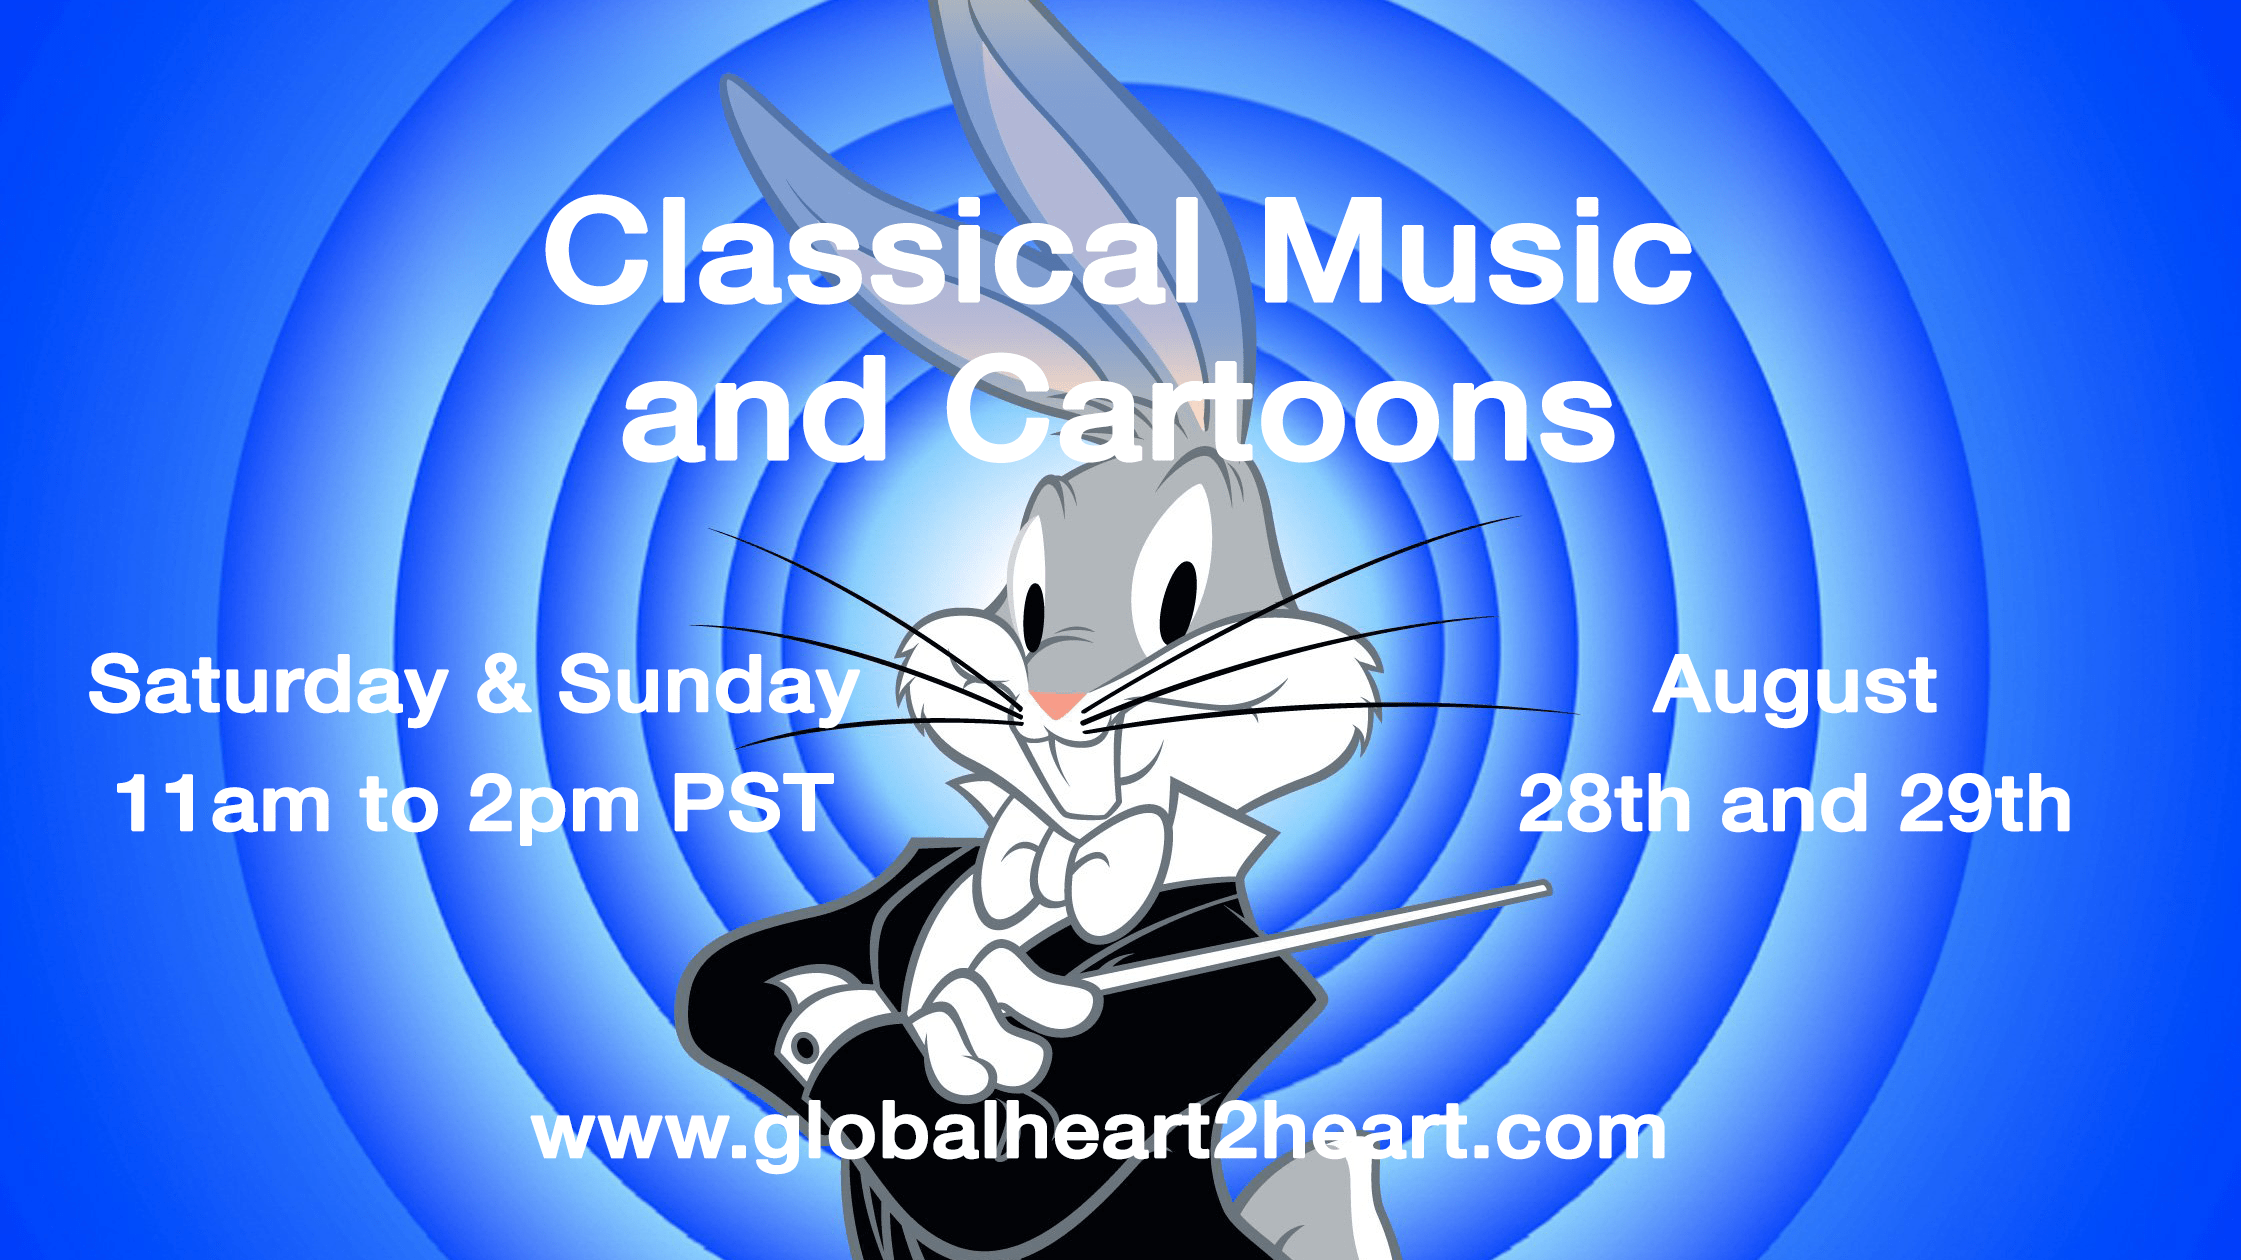 Classical Music and Cartoons this Weekend August 28th and 29th